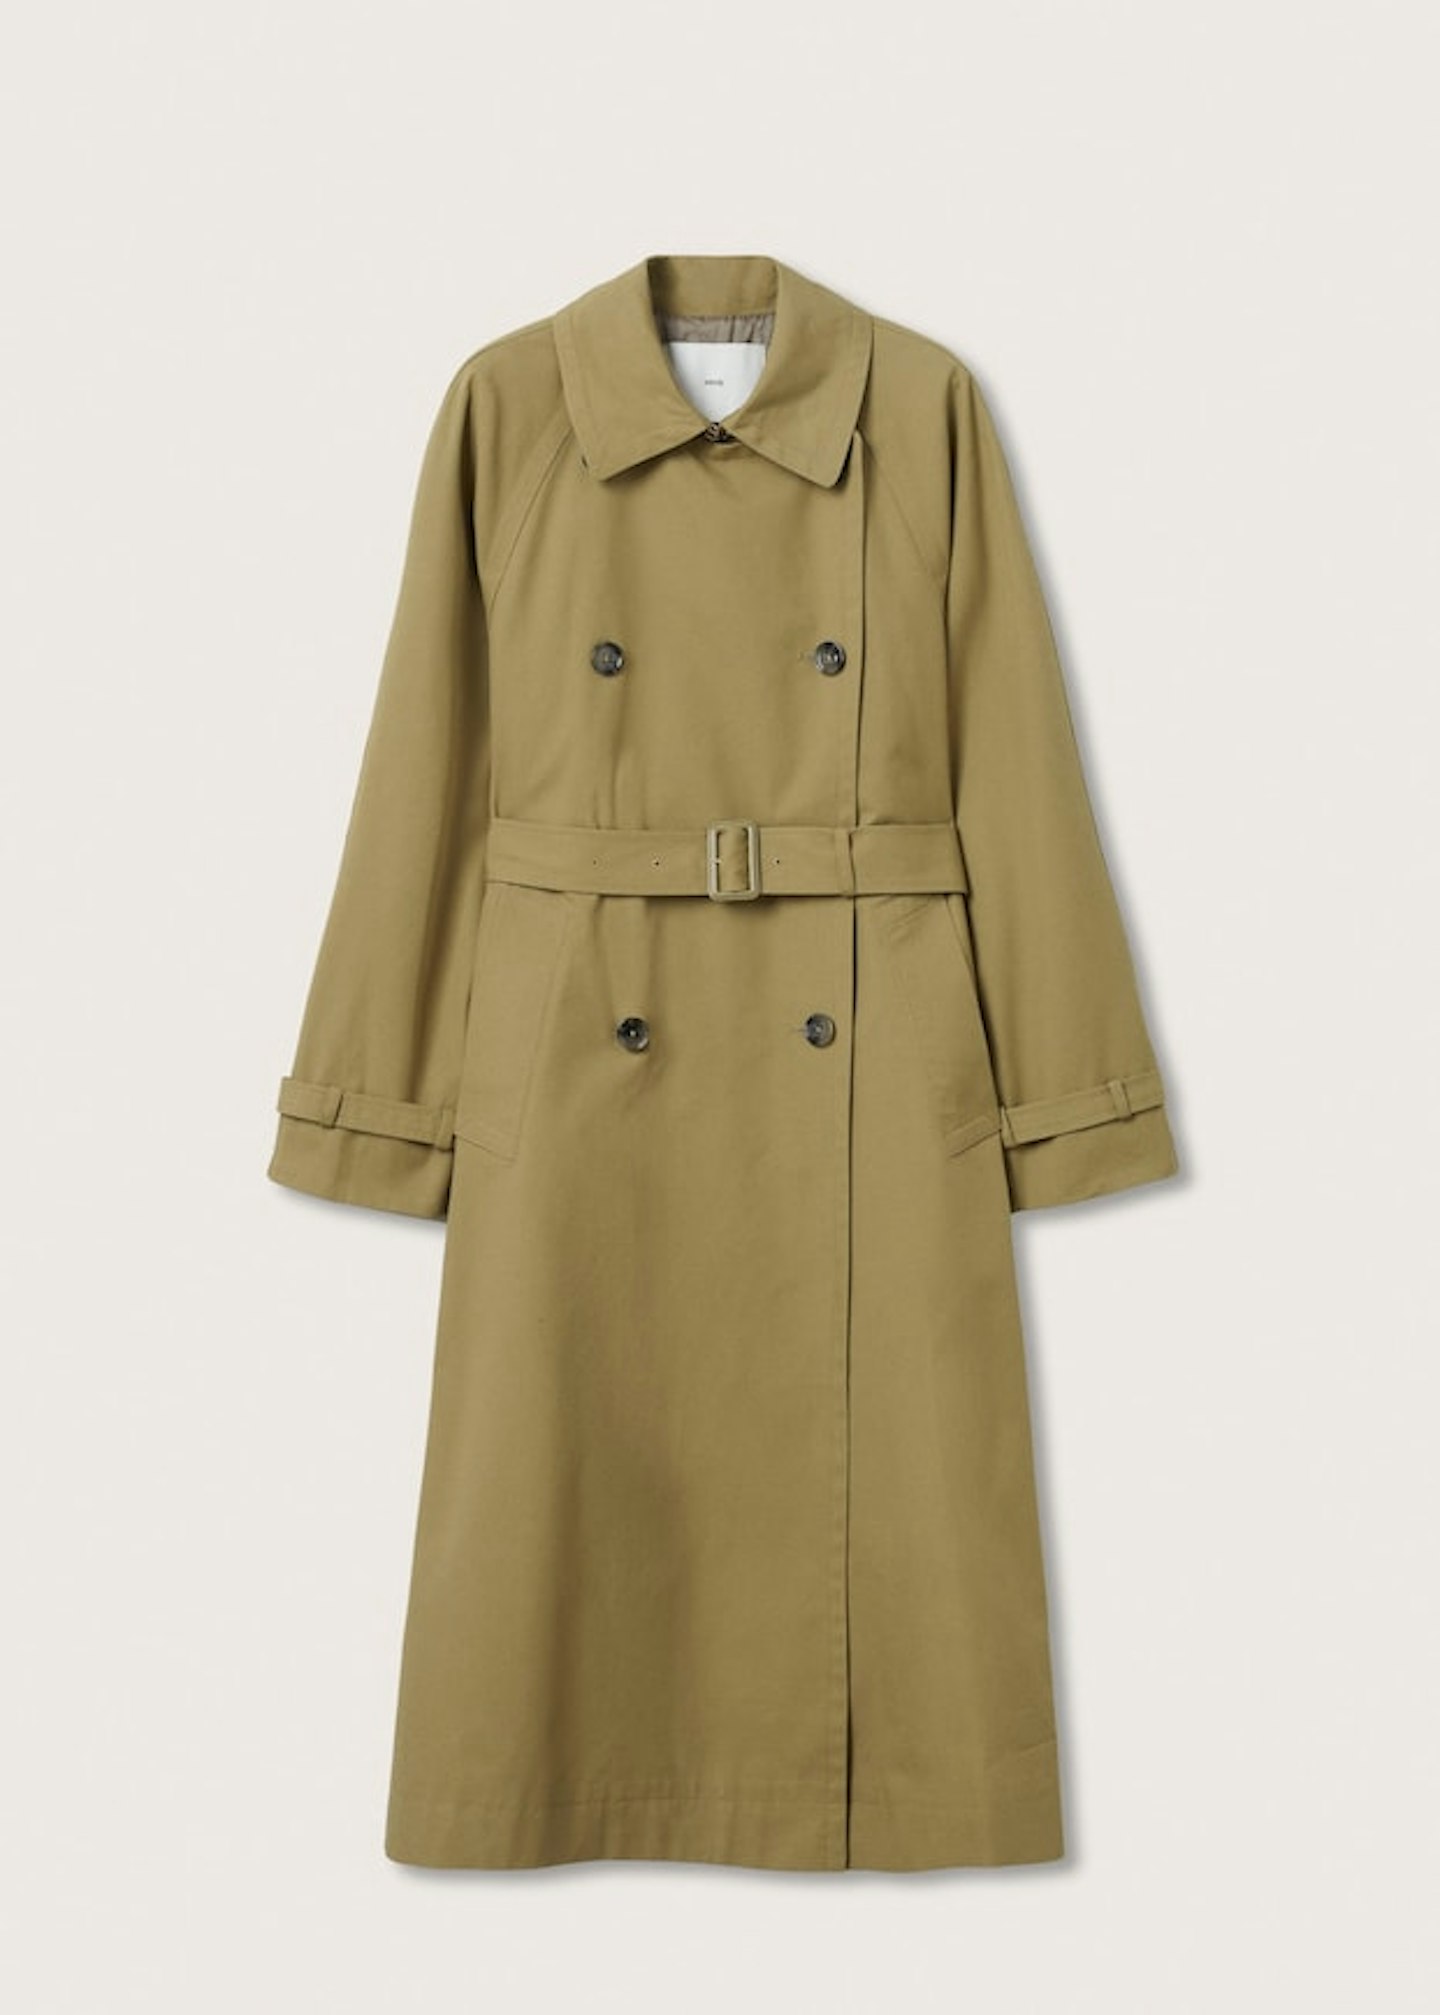 best trench coats for women Mango, Cotton Classic Trench Coat, £119.99